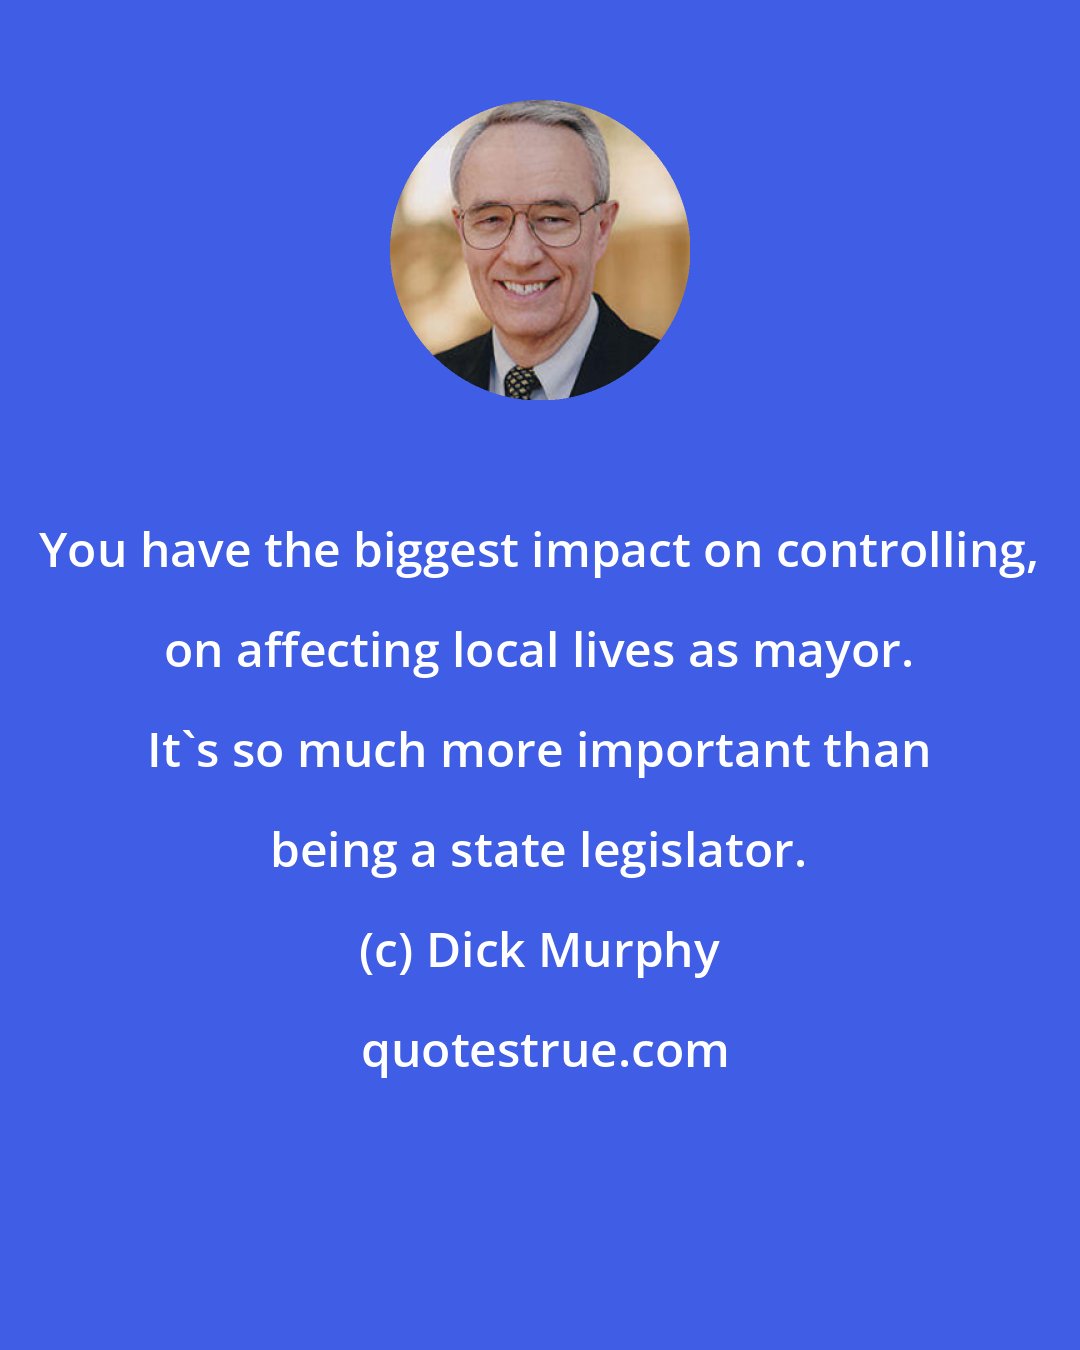 Dick Murphy: You have the biggest impact on controlling, on affecting local lives as mayor. It's so much more important than being a state legislator.